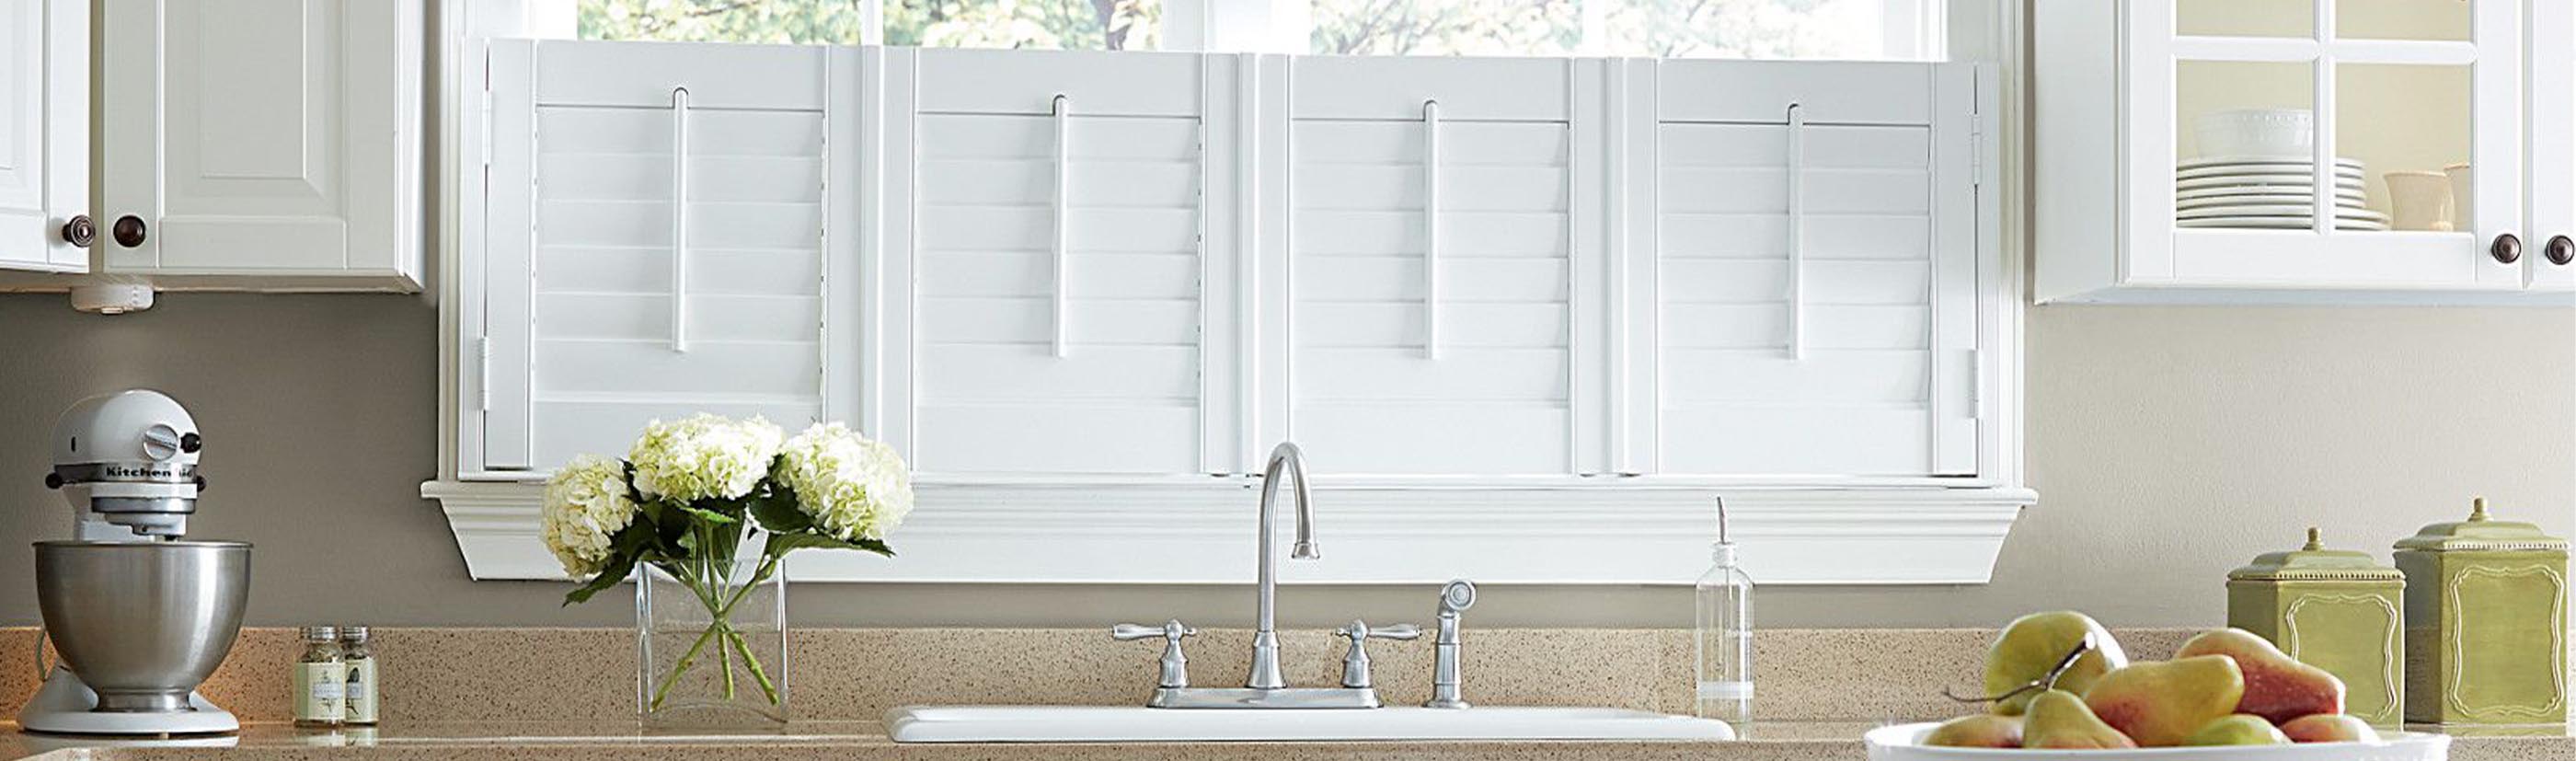 Polywood cafe shutters above a kitchen sink